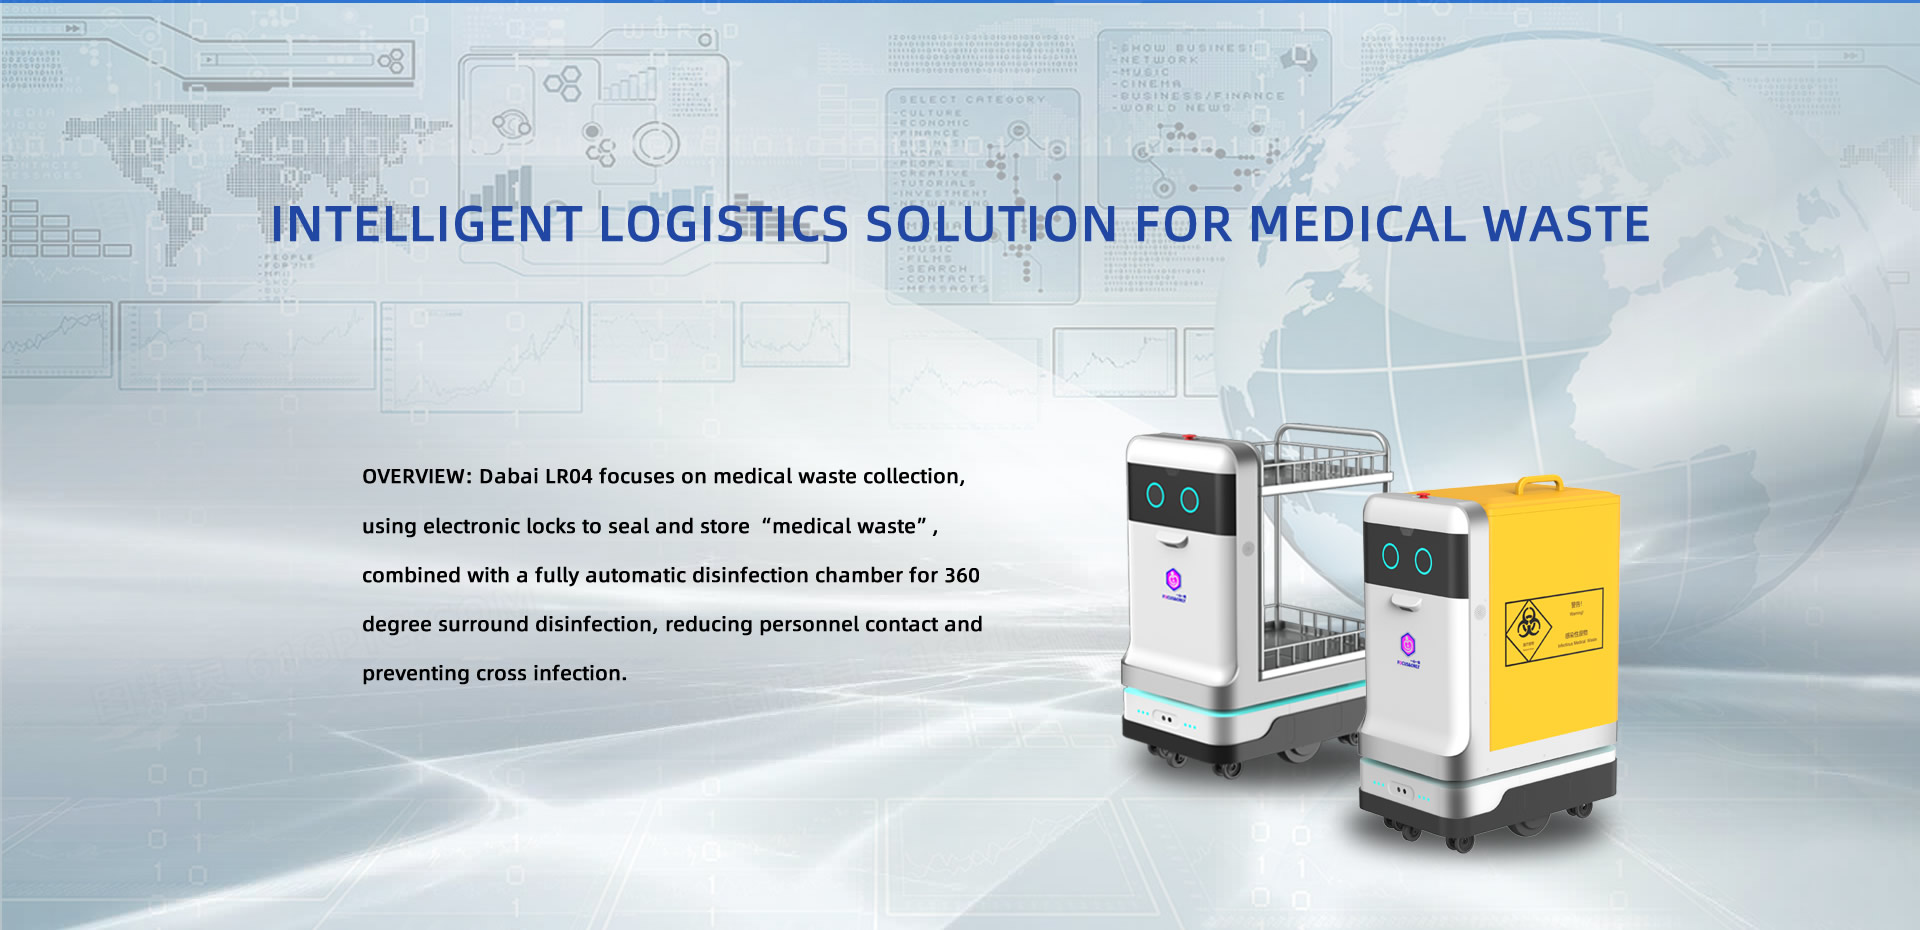 Intelligent logistics solution for medical waste. OVERVIEW: Dabai LR04 focuses on medical waste collection, using electronic locks to seal and store “medical waste”, combined with a fully automatic disinfection chamber for 360 degree surround disinfection, reducing personnel contact and preventing cross infection.